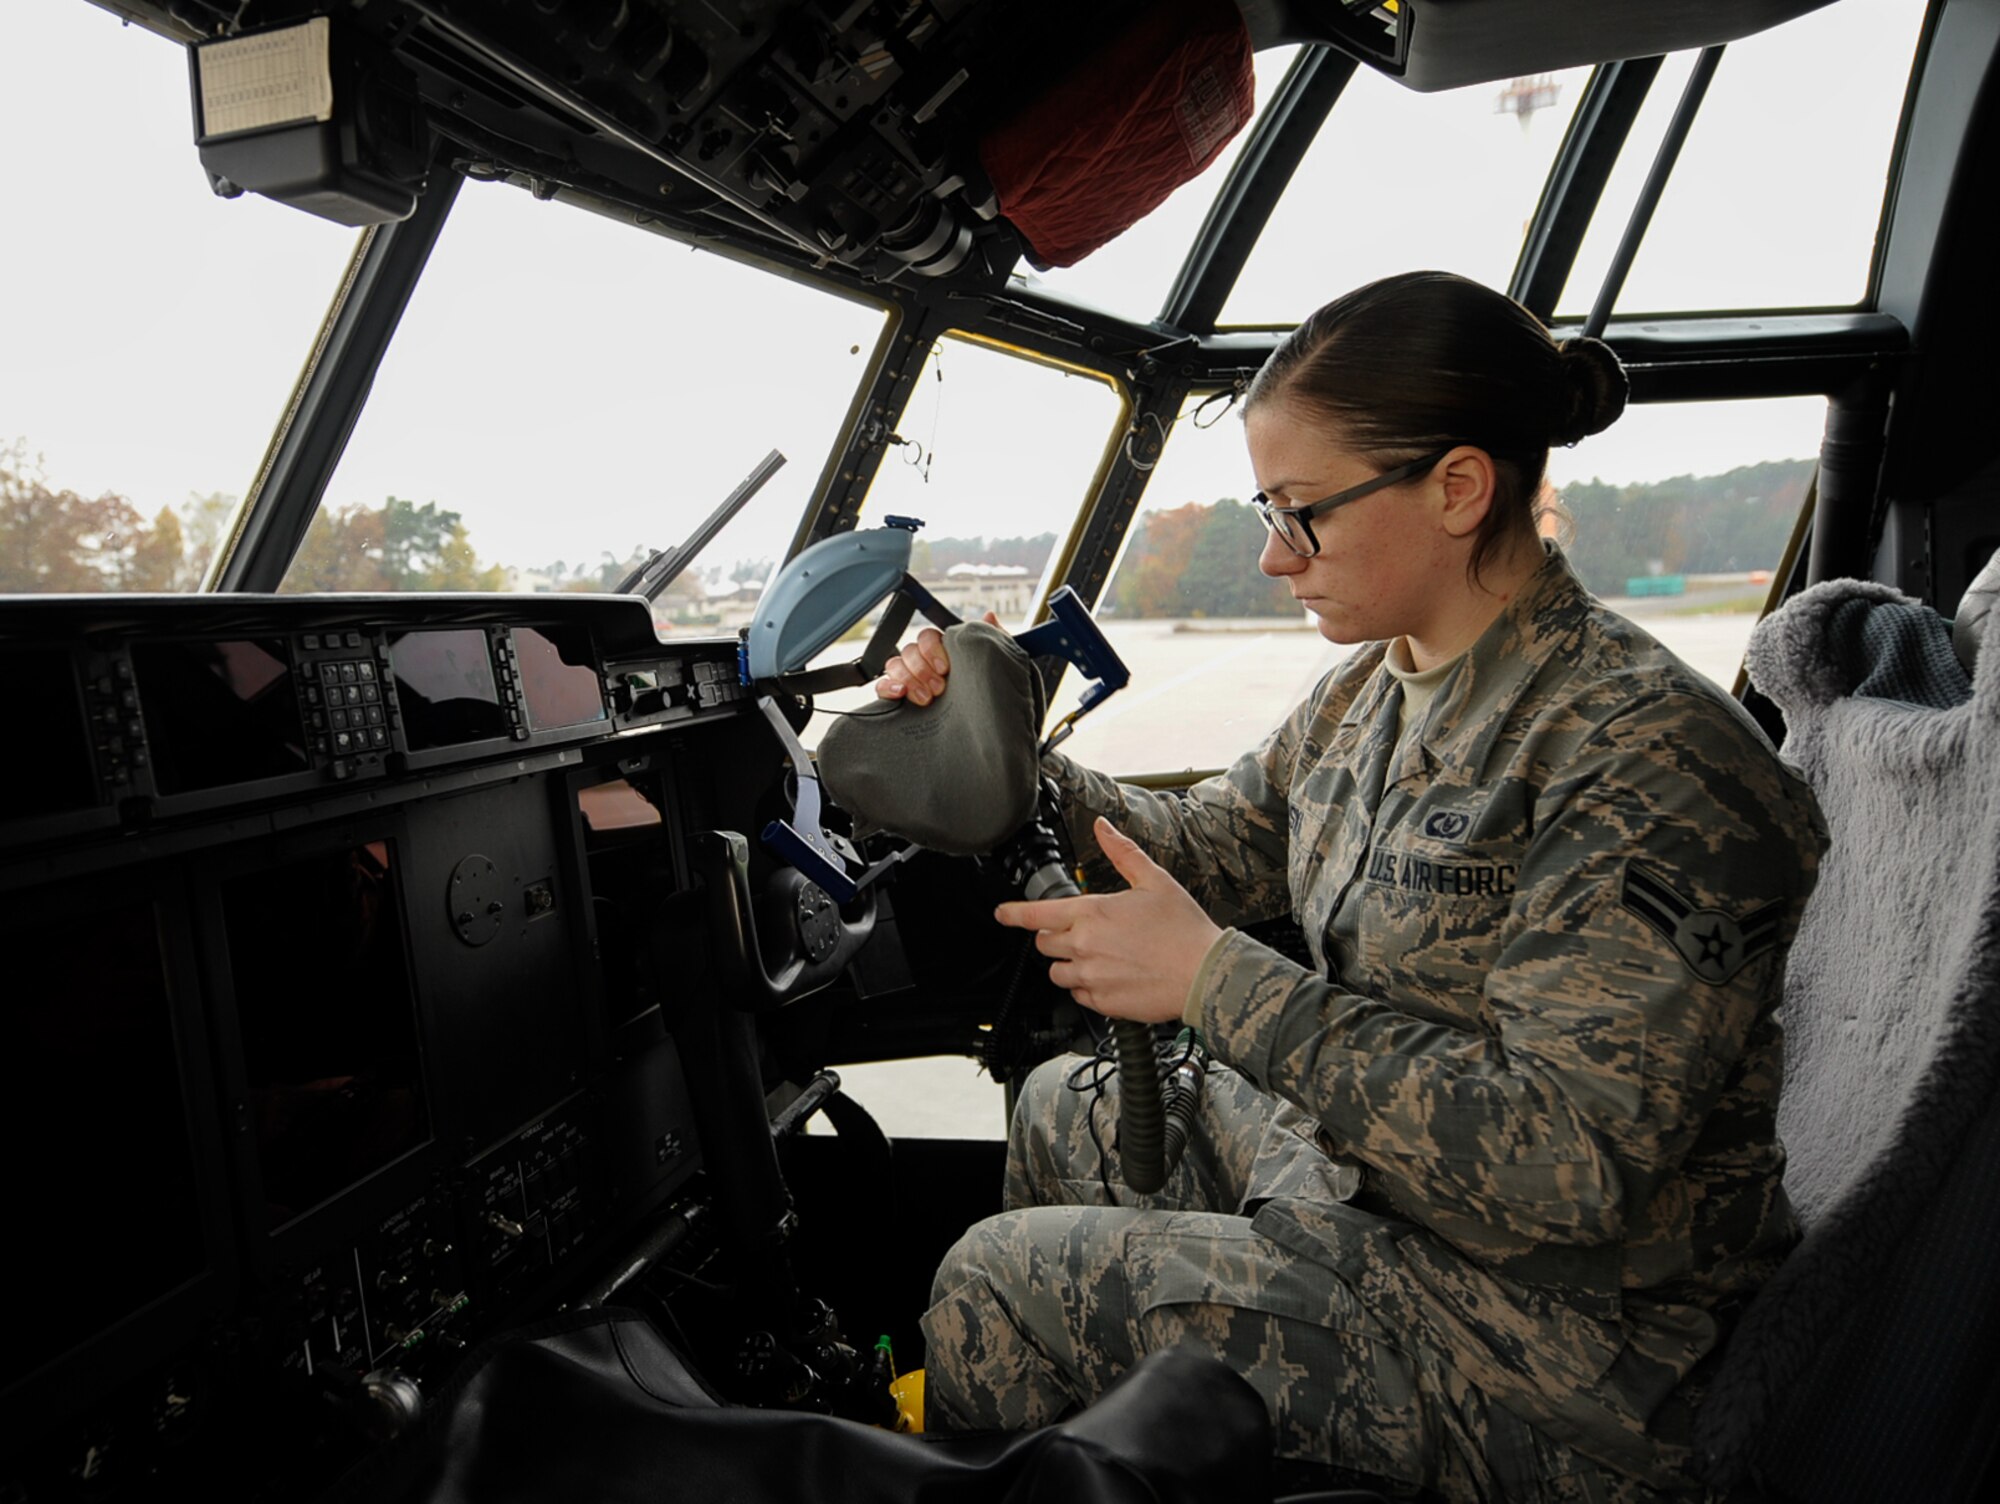 Airman 1st Class Adriya Osinski, 86th Operations Support Squadron aircrew flight equipment apprentice, adjusts an oxygen mask inside of a 37th Airlift Squadron C-130 J Super Hercules aircraft at Ramstein Air Base, Germany, Nov. 4, 2016. As an aircrew flight equipment technician, Osinski prepares equipment such as oxygen and survival vests, which include medical supplies, ways to purify water, and other basic survival items. (U.S. Air Force photo by Airman 1st Class Savannah L. Waters)

